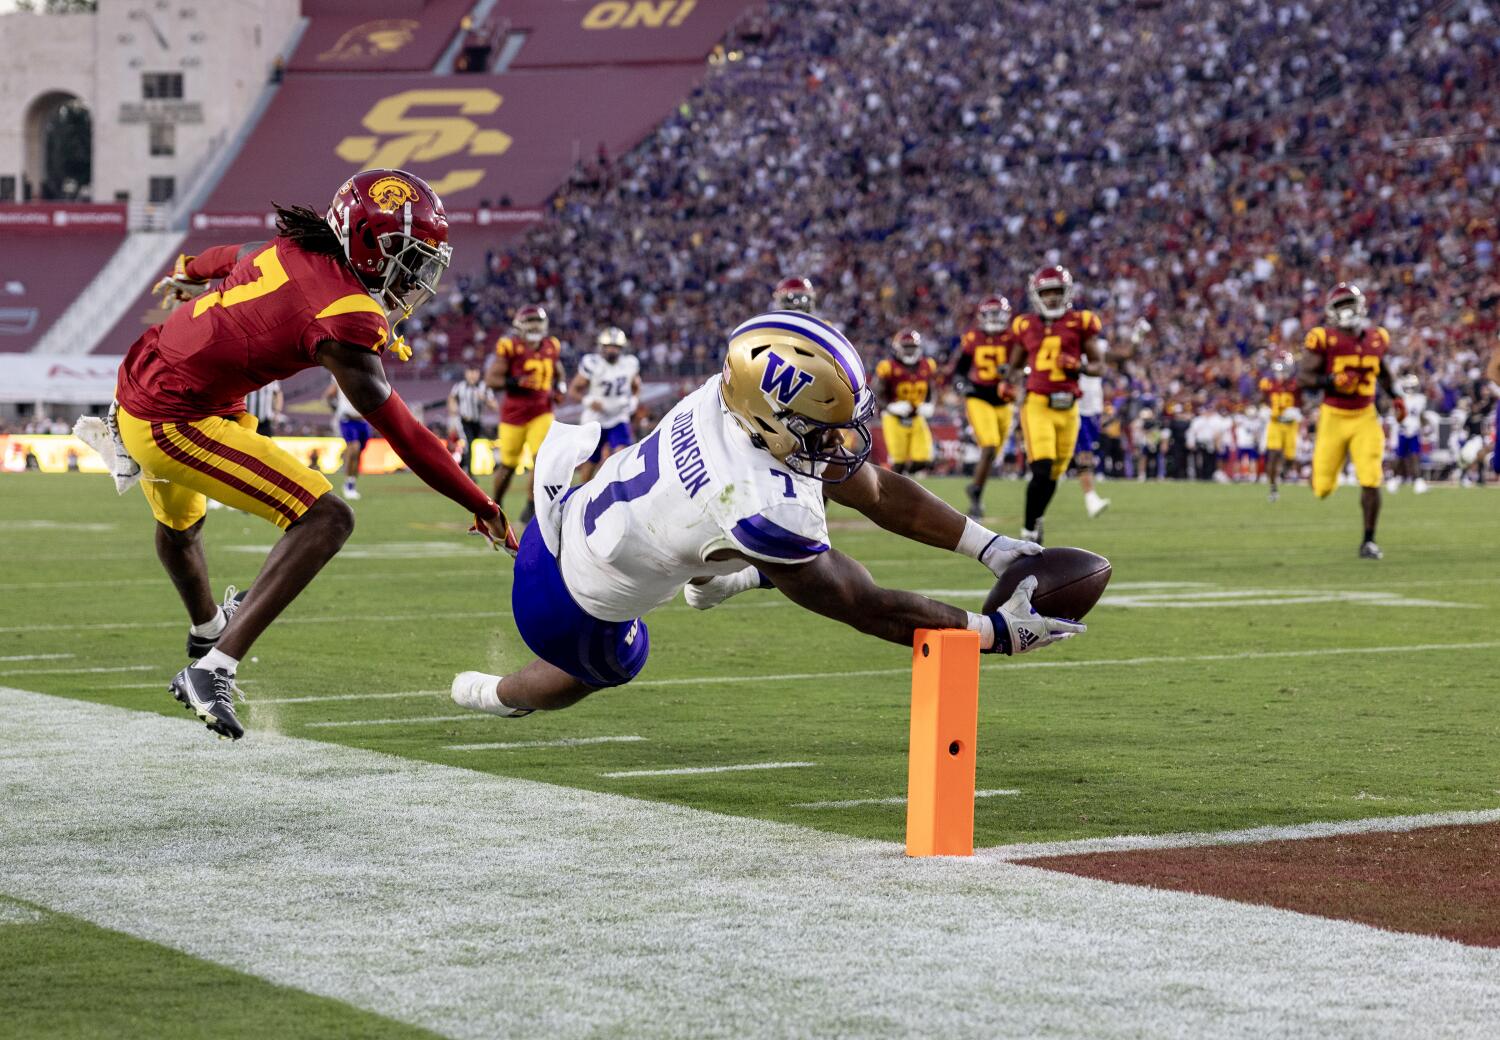 USC can't keep up with Washington in scoring spree, crippling its Pac-12 title hopes